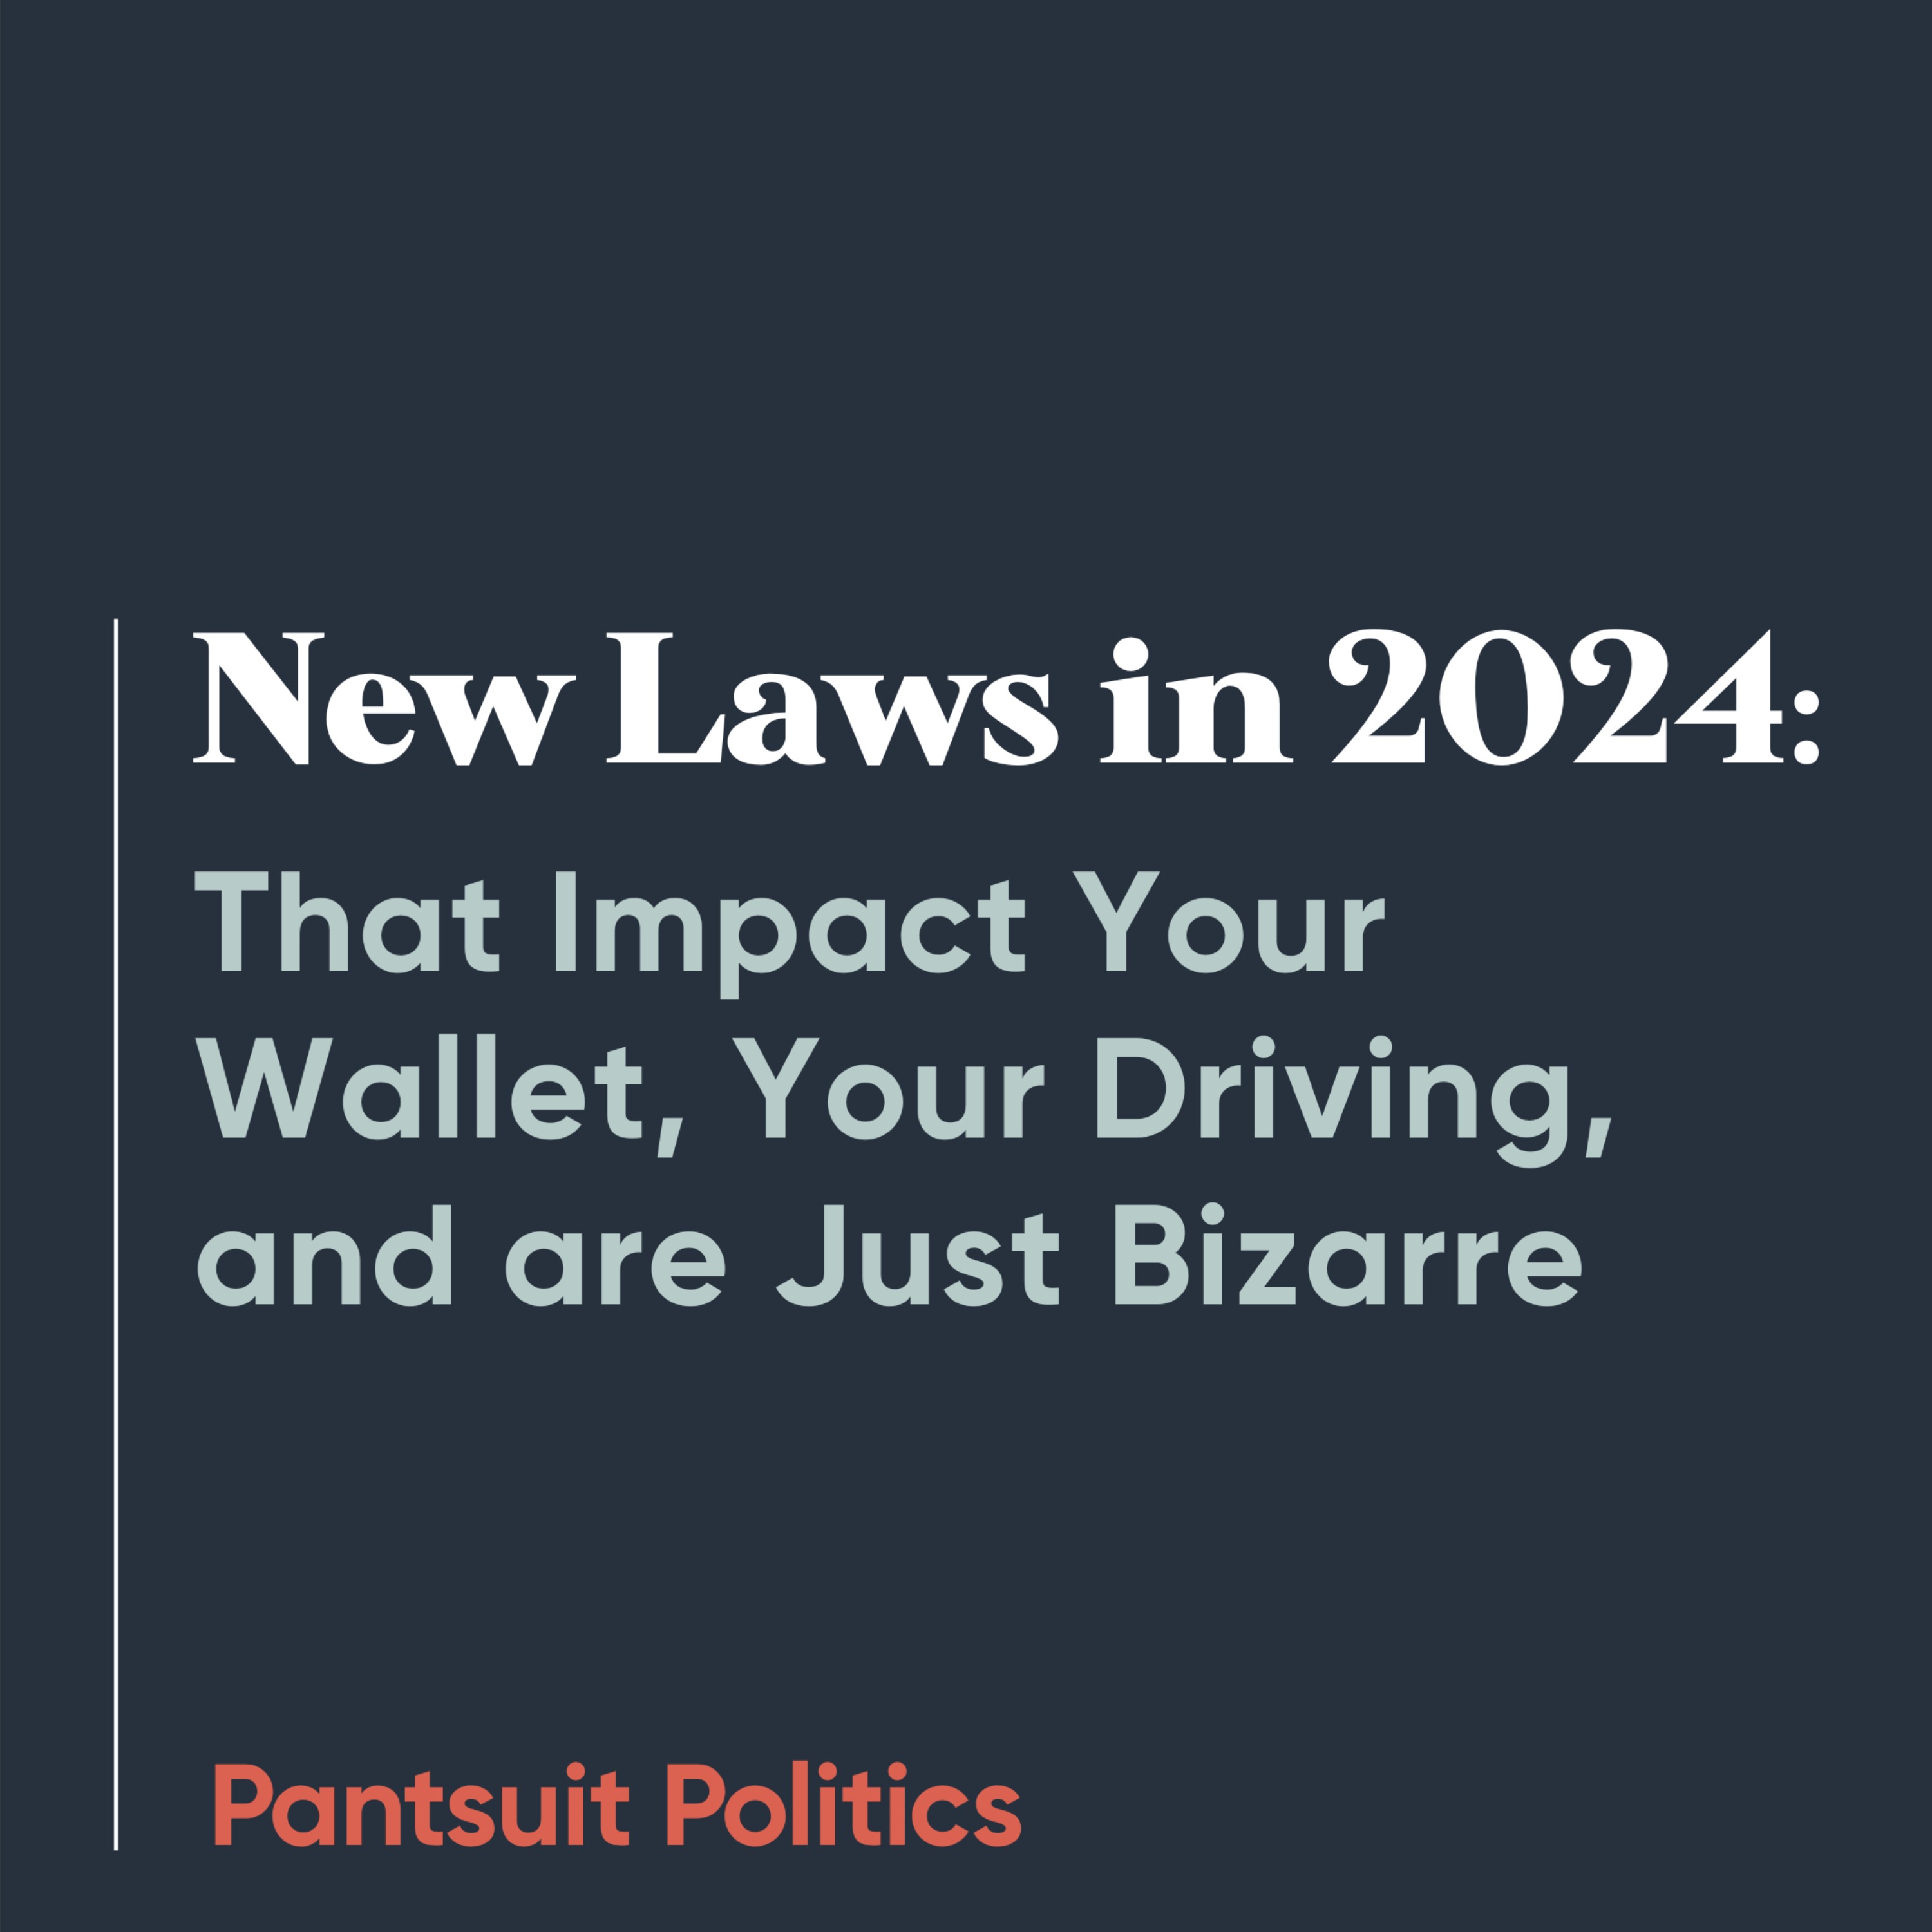 New Laws in 2024 That Impact Your Wallet, Your Driving, and are Just Bizarre